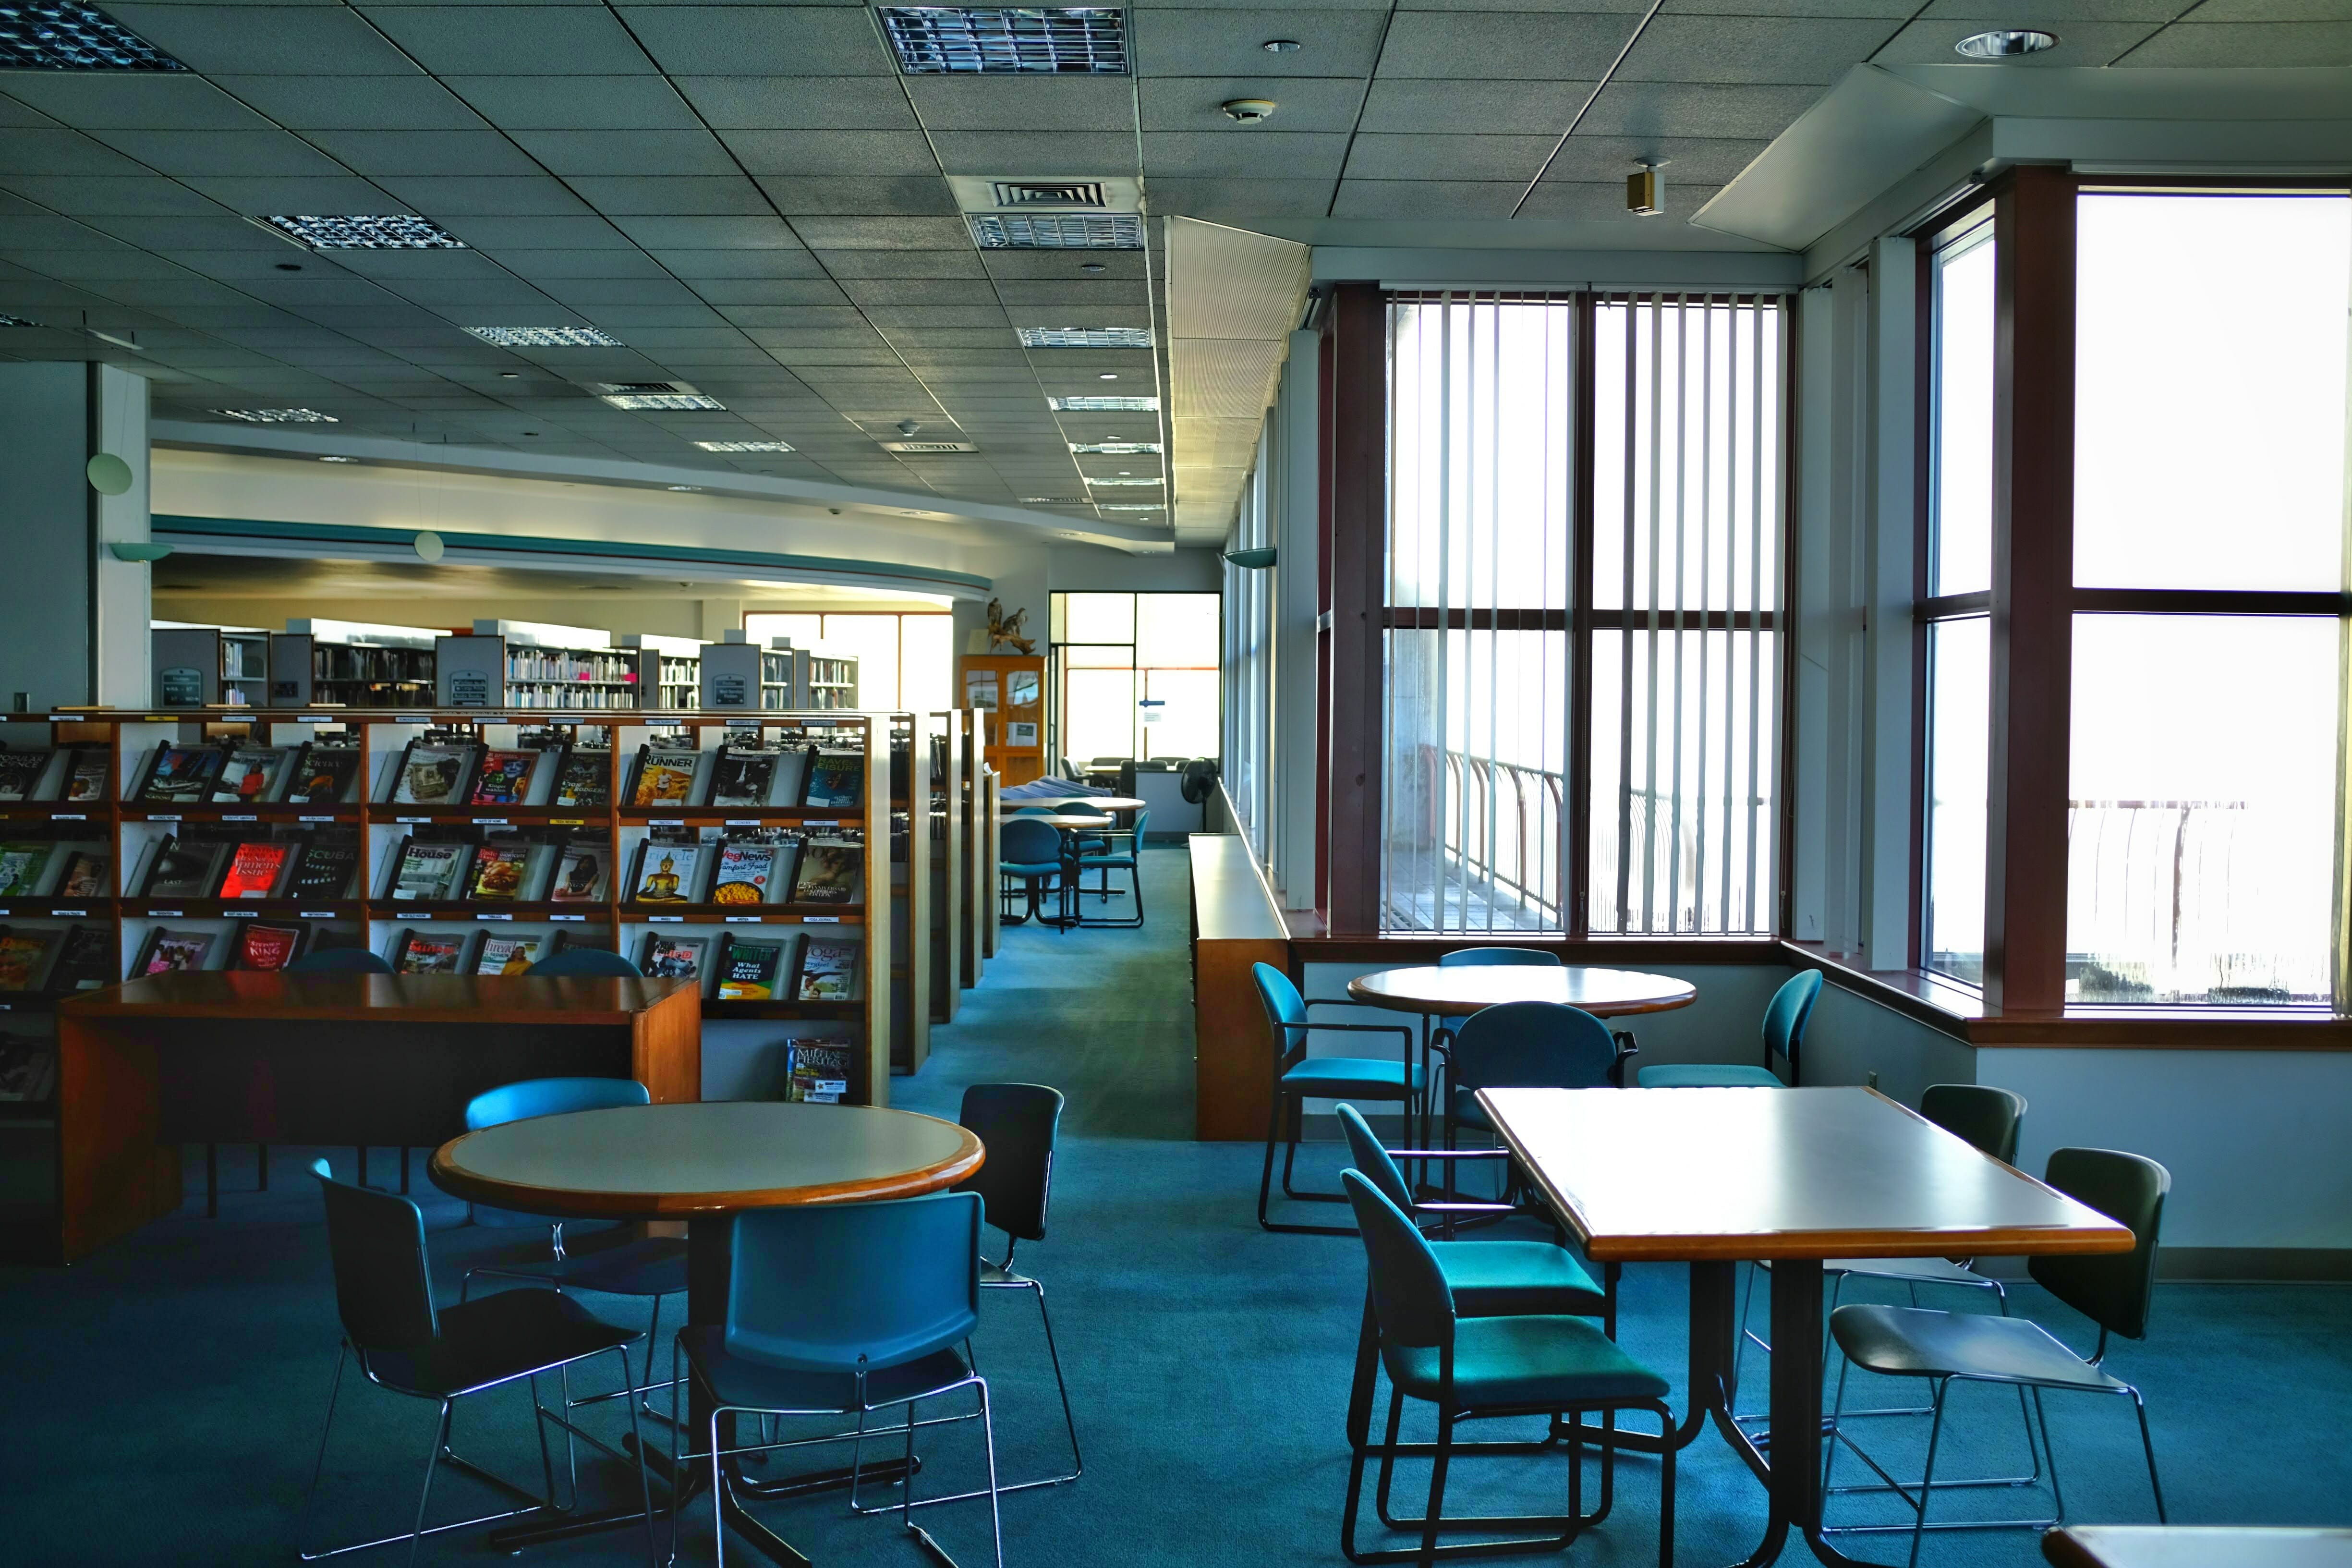 Seating area at the Downtown Library